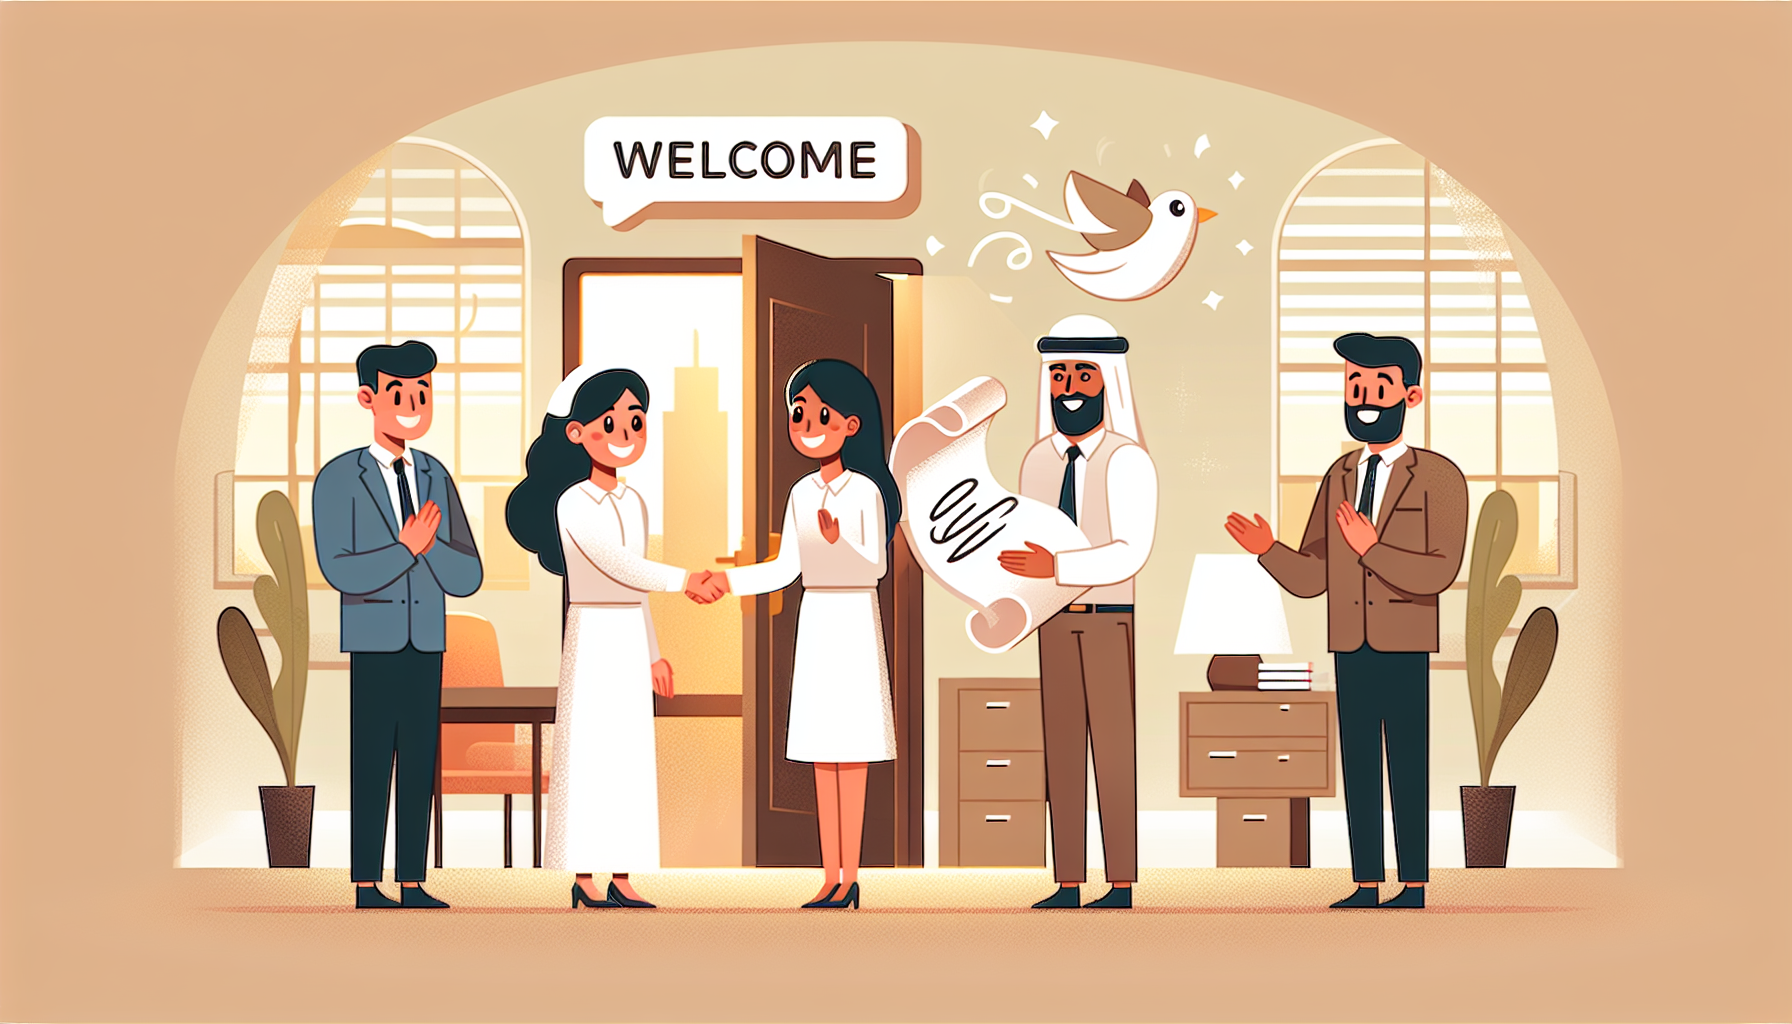 Illustration of a warm greeting in a welcome letter for employee handbook